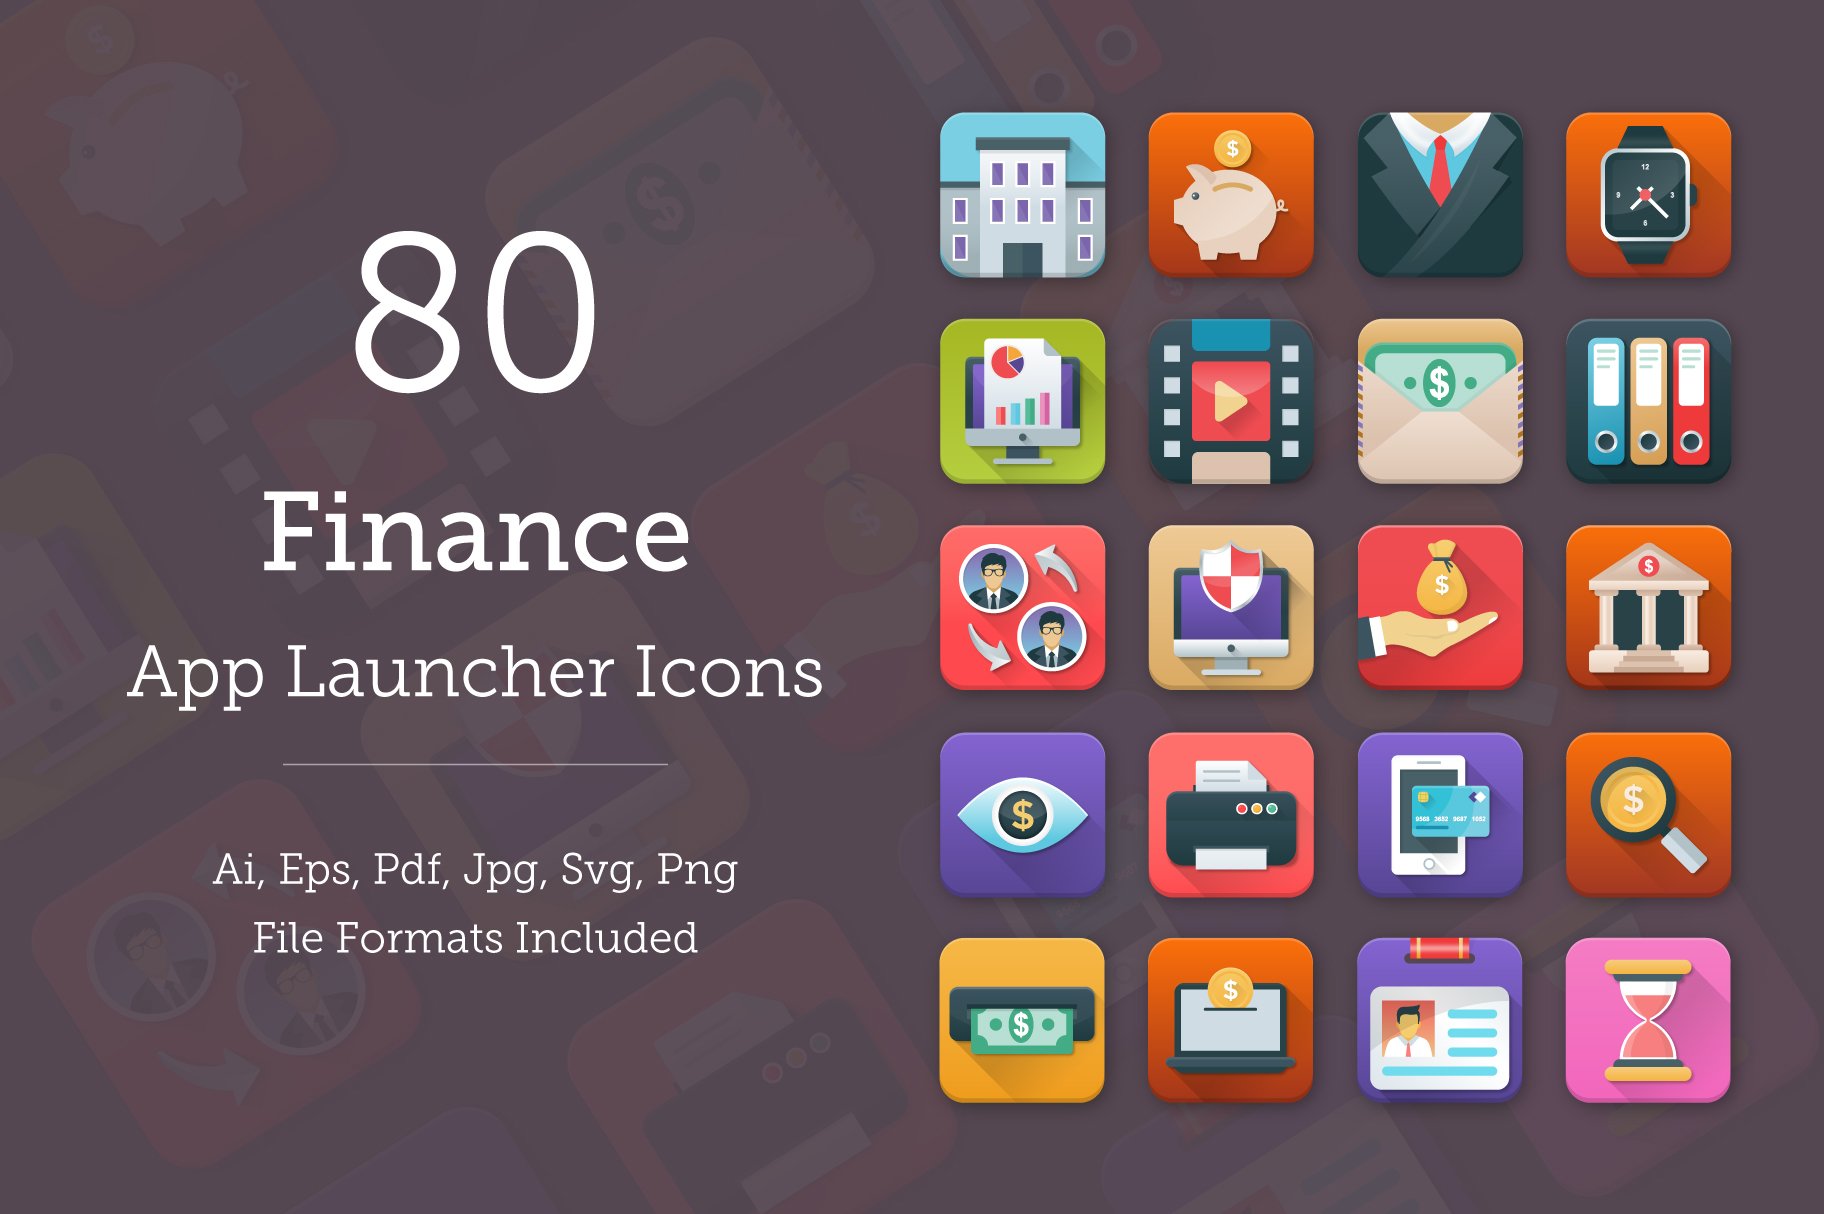 80 Finance App Icons cover image.